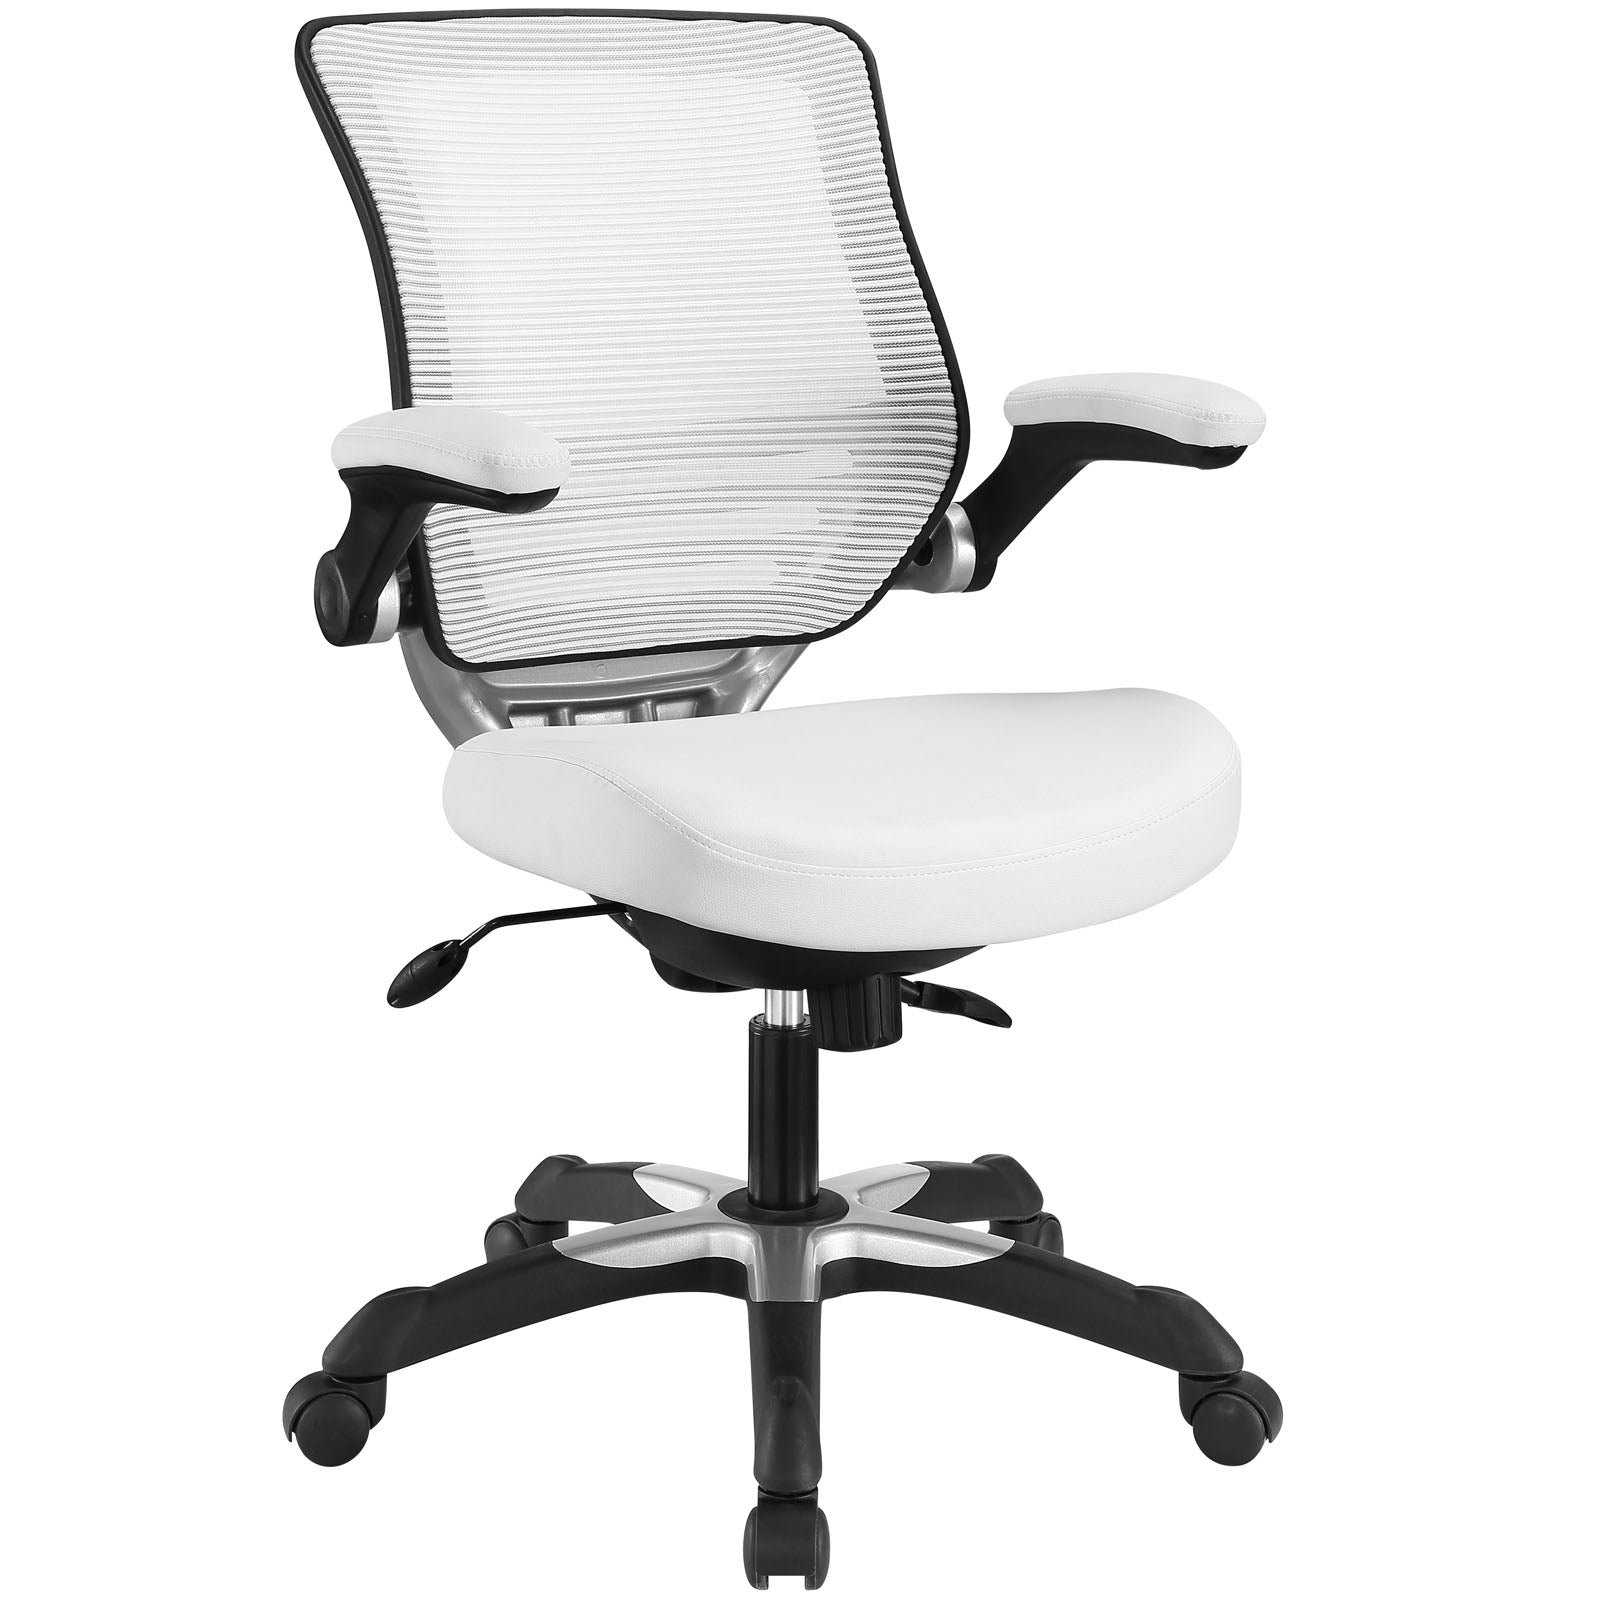 Shop Brown Edge Vinyl Office Chair at BUILDMyplace